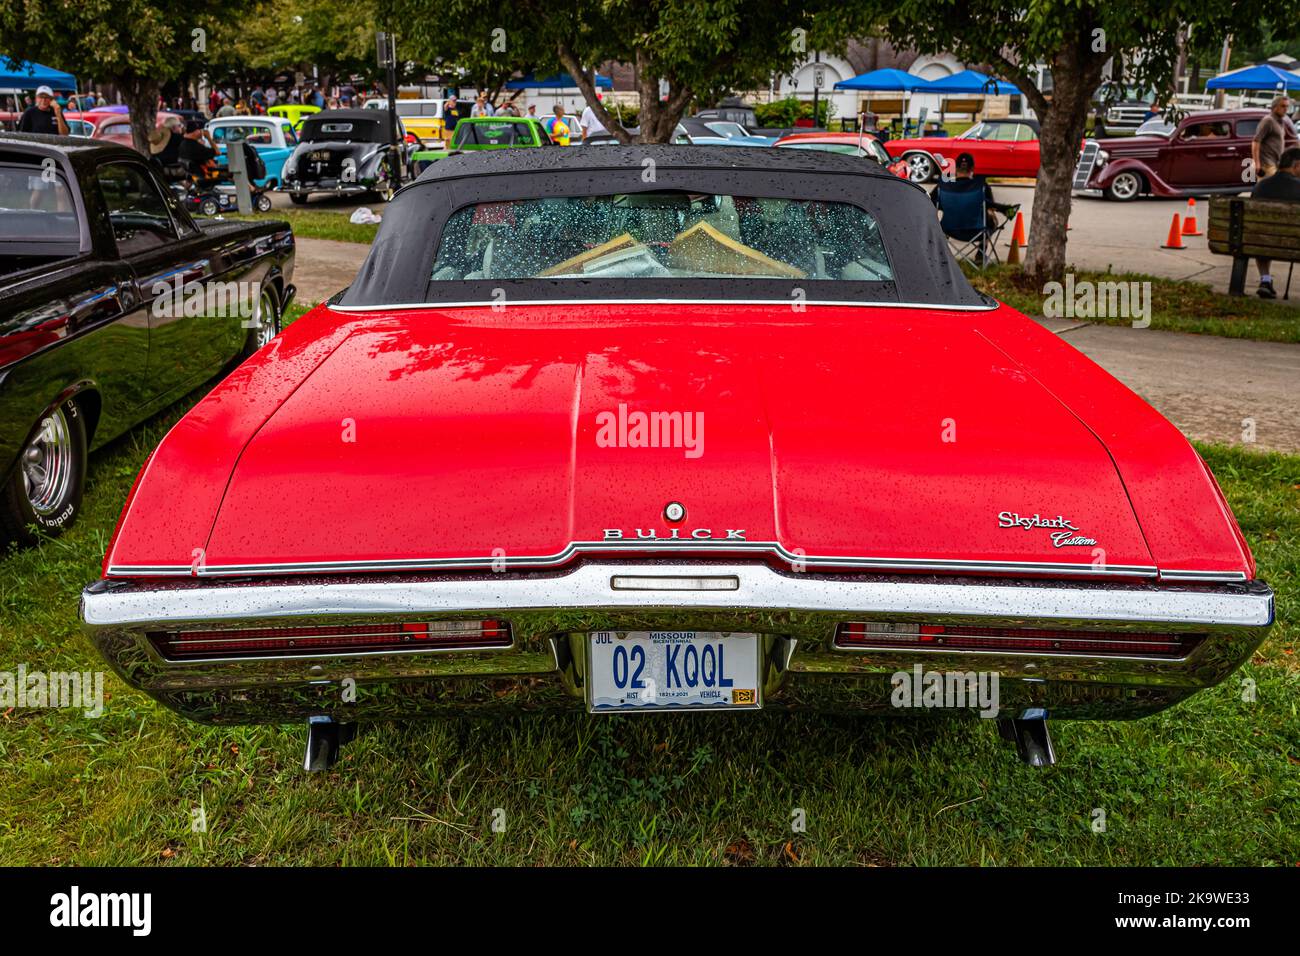 Des Moines, IA - July 01, 2022: High perspective rear view of a 1969 Buick Skylark Convertible at a local car show. Stock Photo